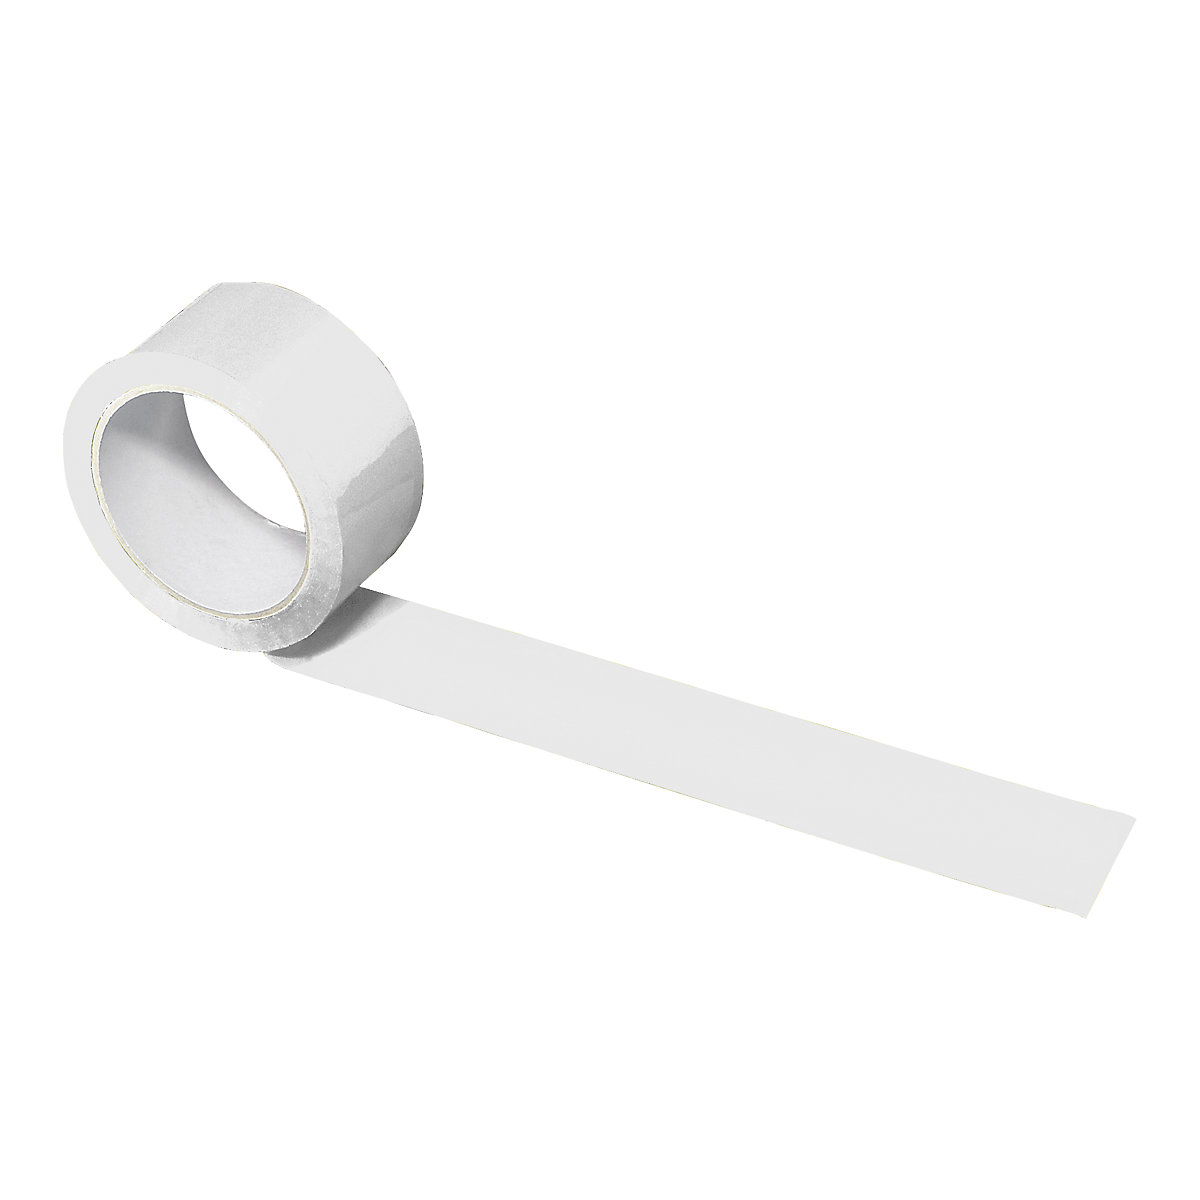 PP packing tape, in different colours, pack of 108 rolls, white, tape width 50 mm-1